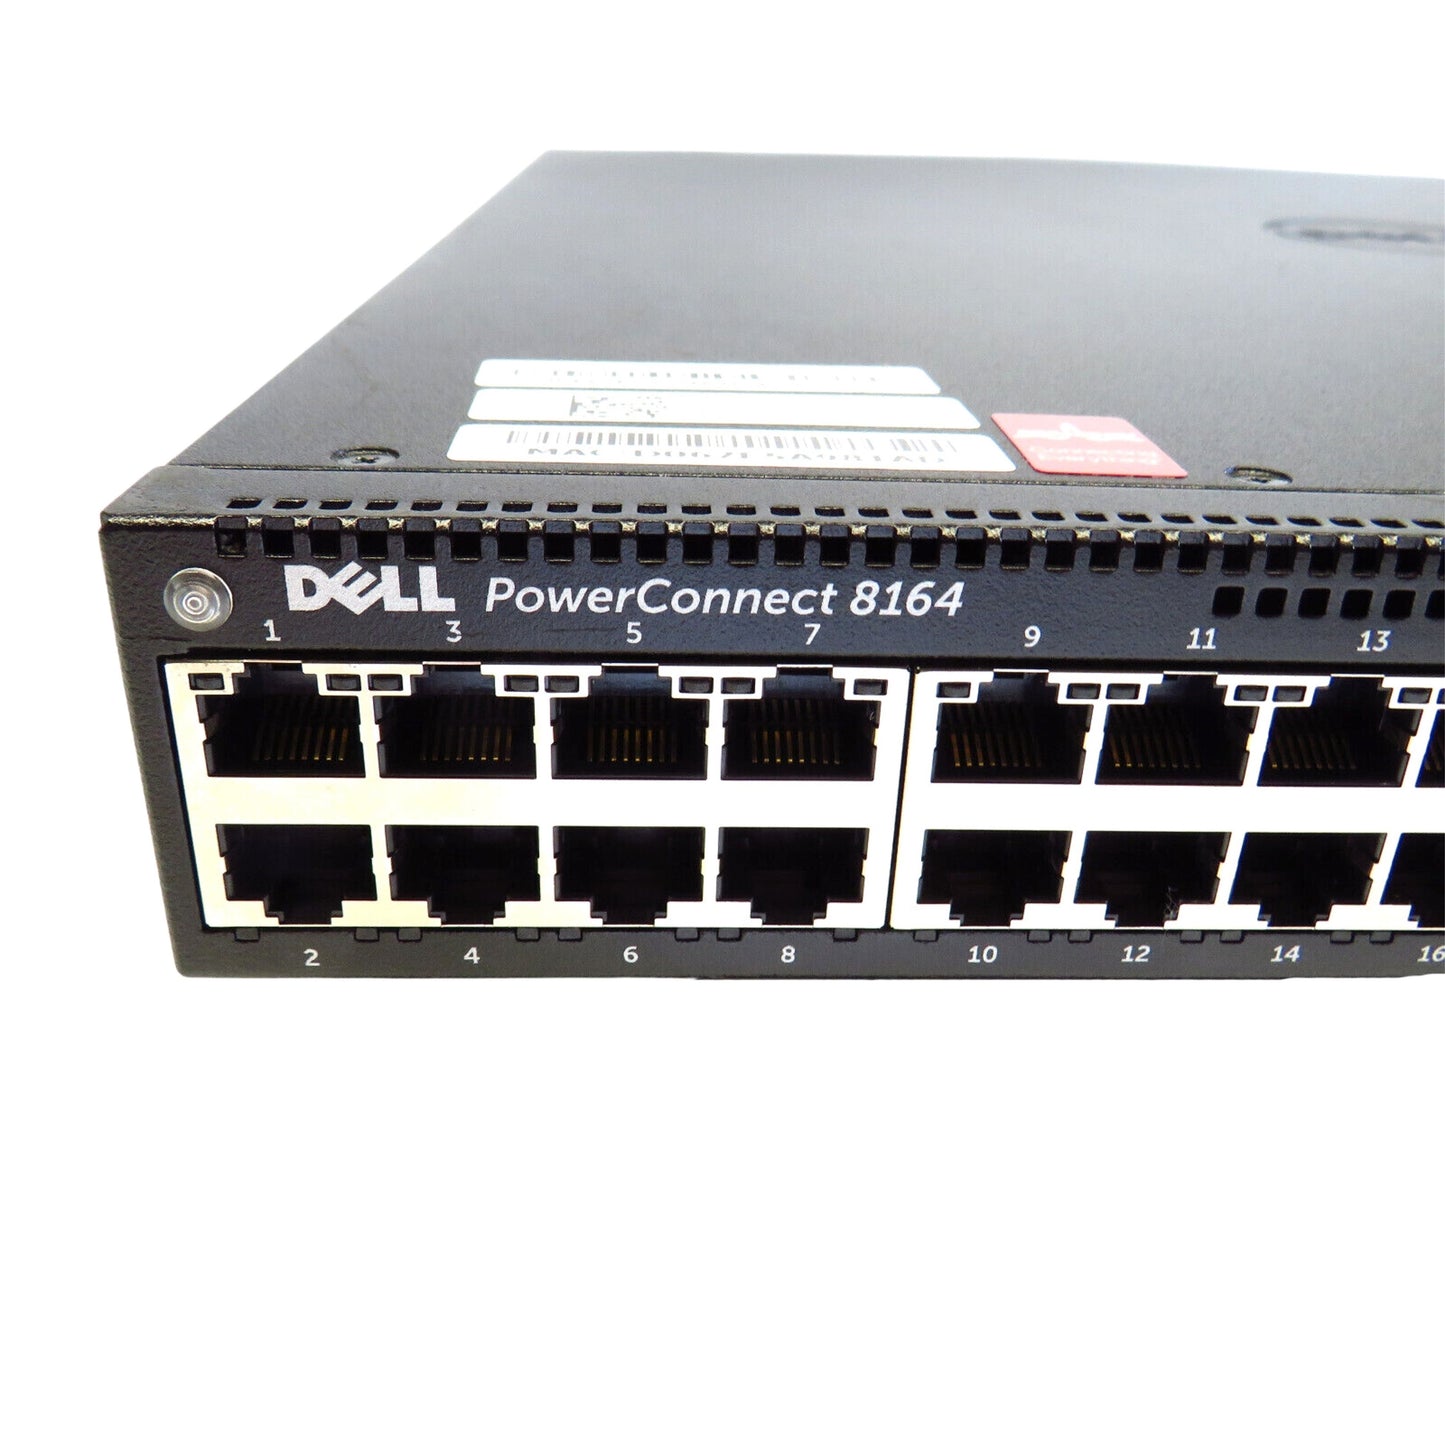 Dell H0F6C PowerConnect 8164 48 Port 10GbE 2 Port QSFP+ Switch DMG (Refurbished)